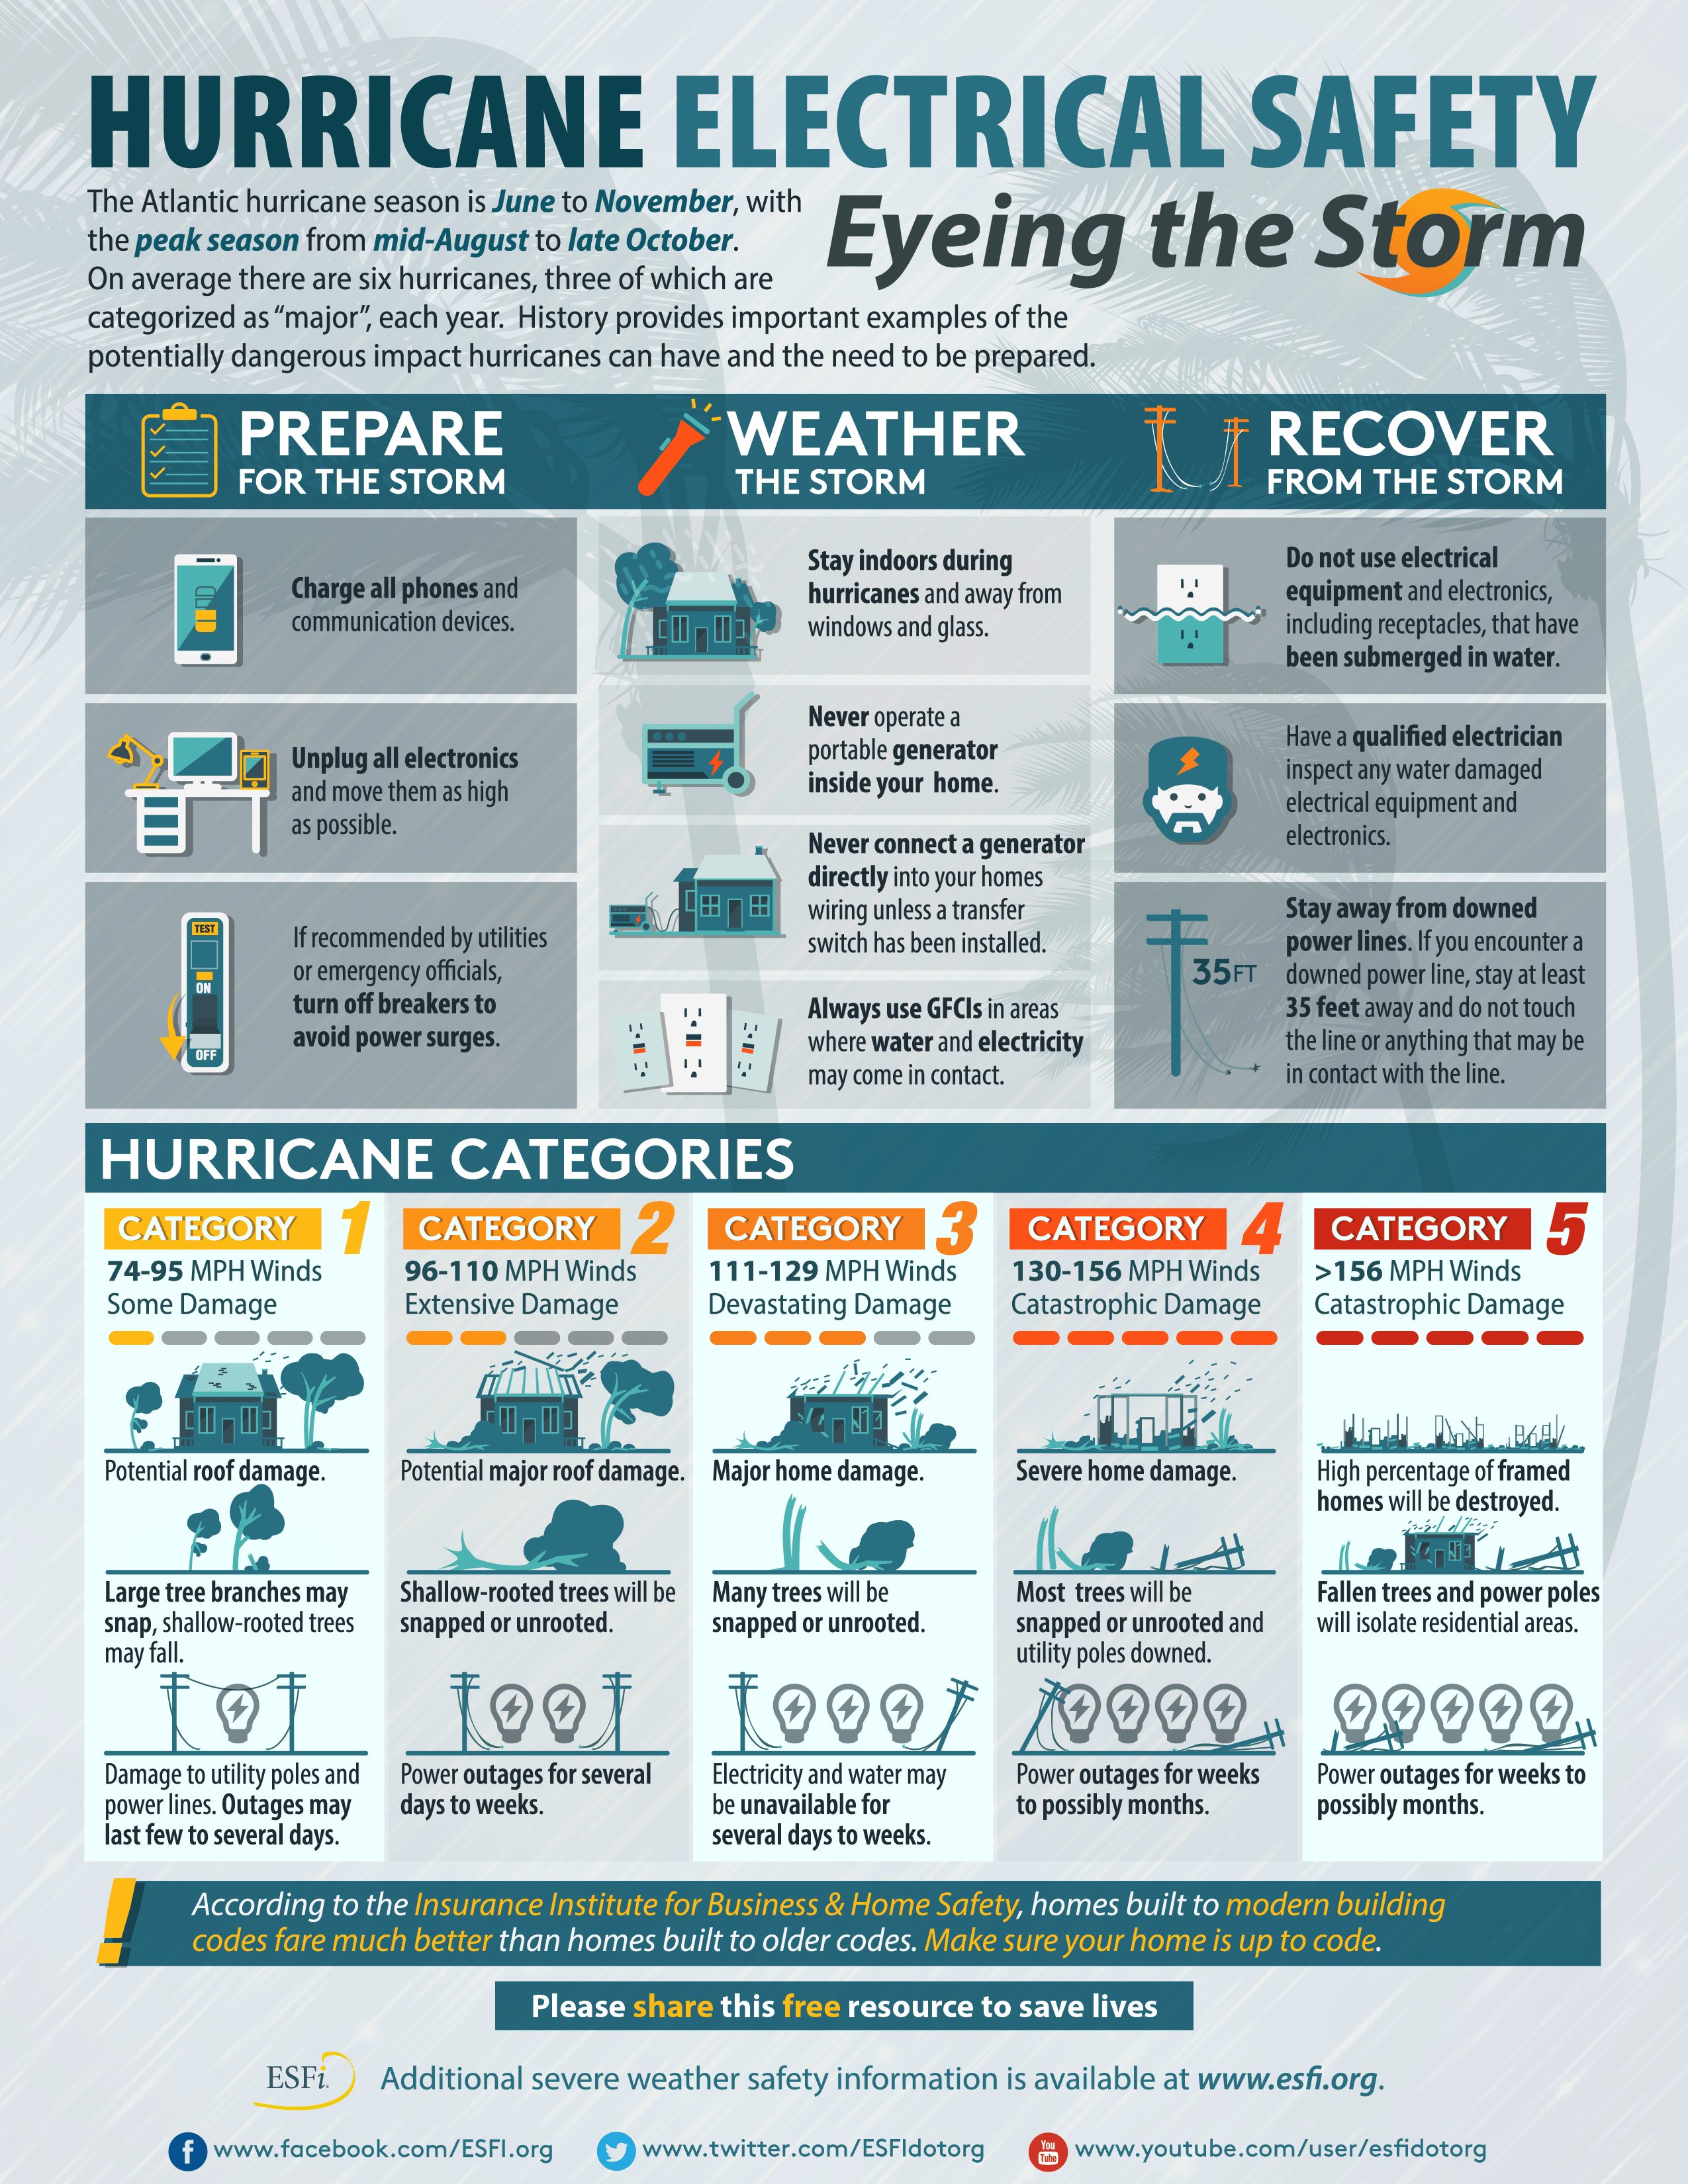 How to Prepare for a Power Outage: A Guide + Checklist